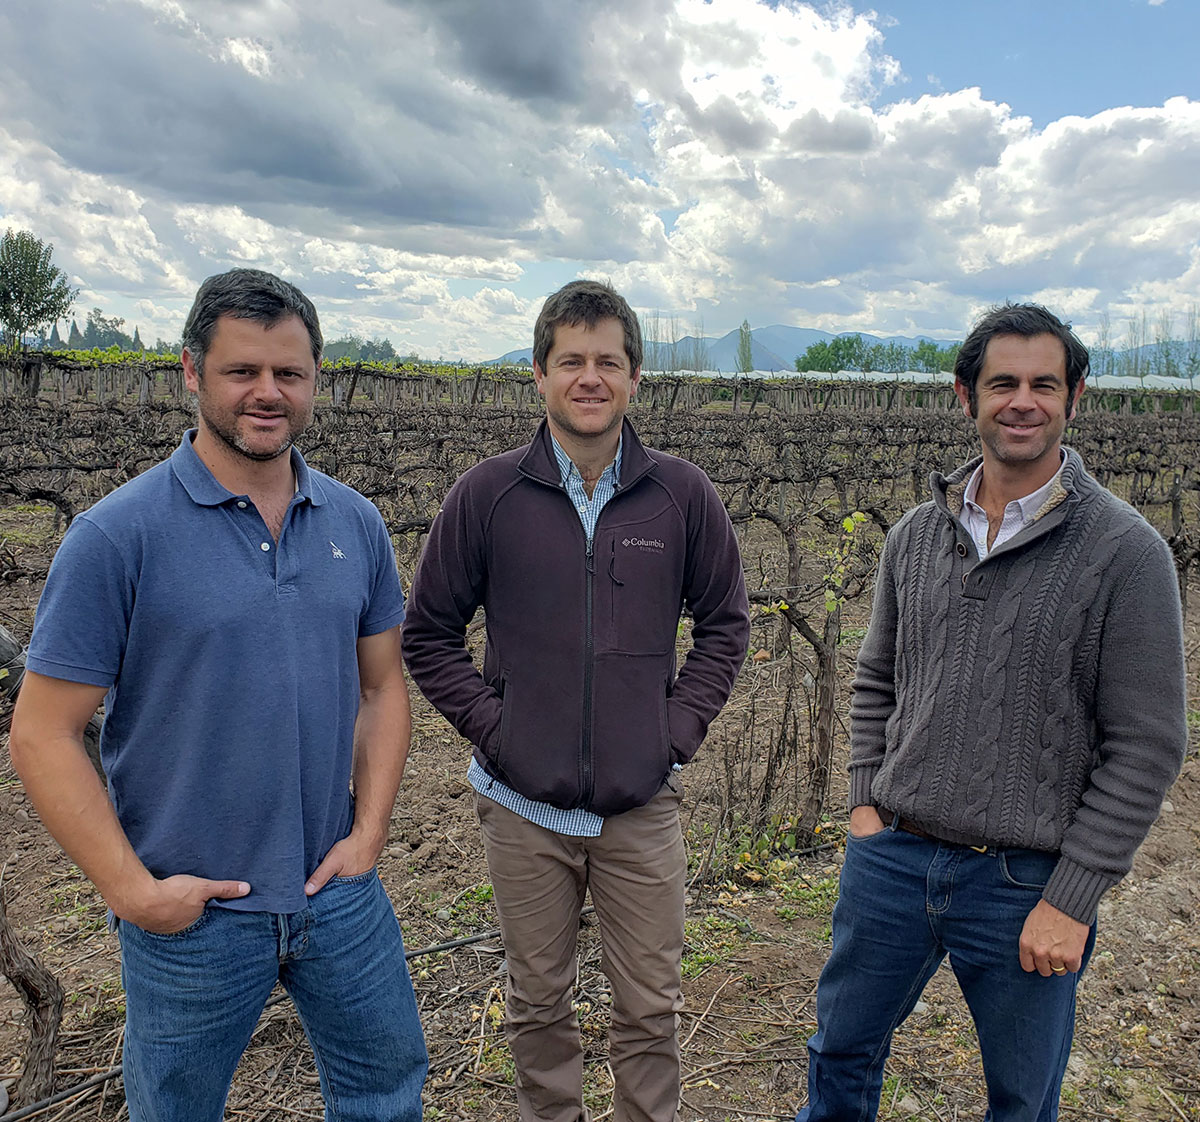 The three Correa brothers, current owners of the Bodegas Tagua Tagua winery in the Rapel Valley, Chile.